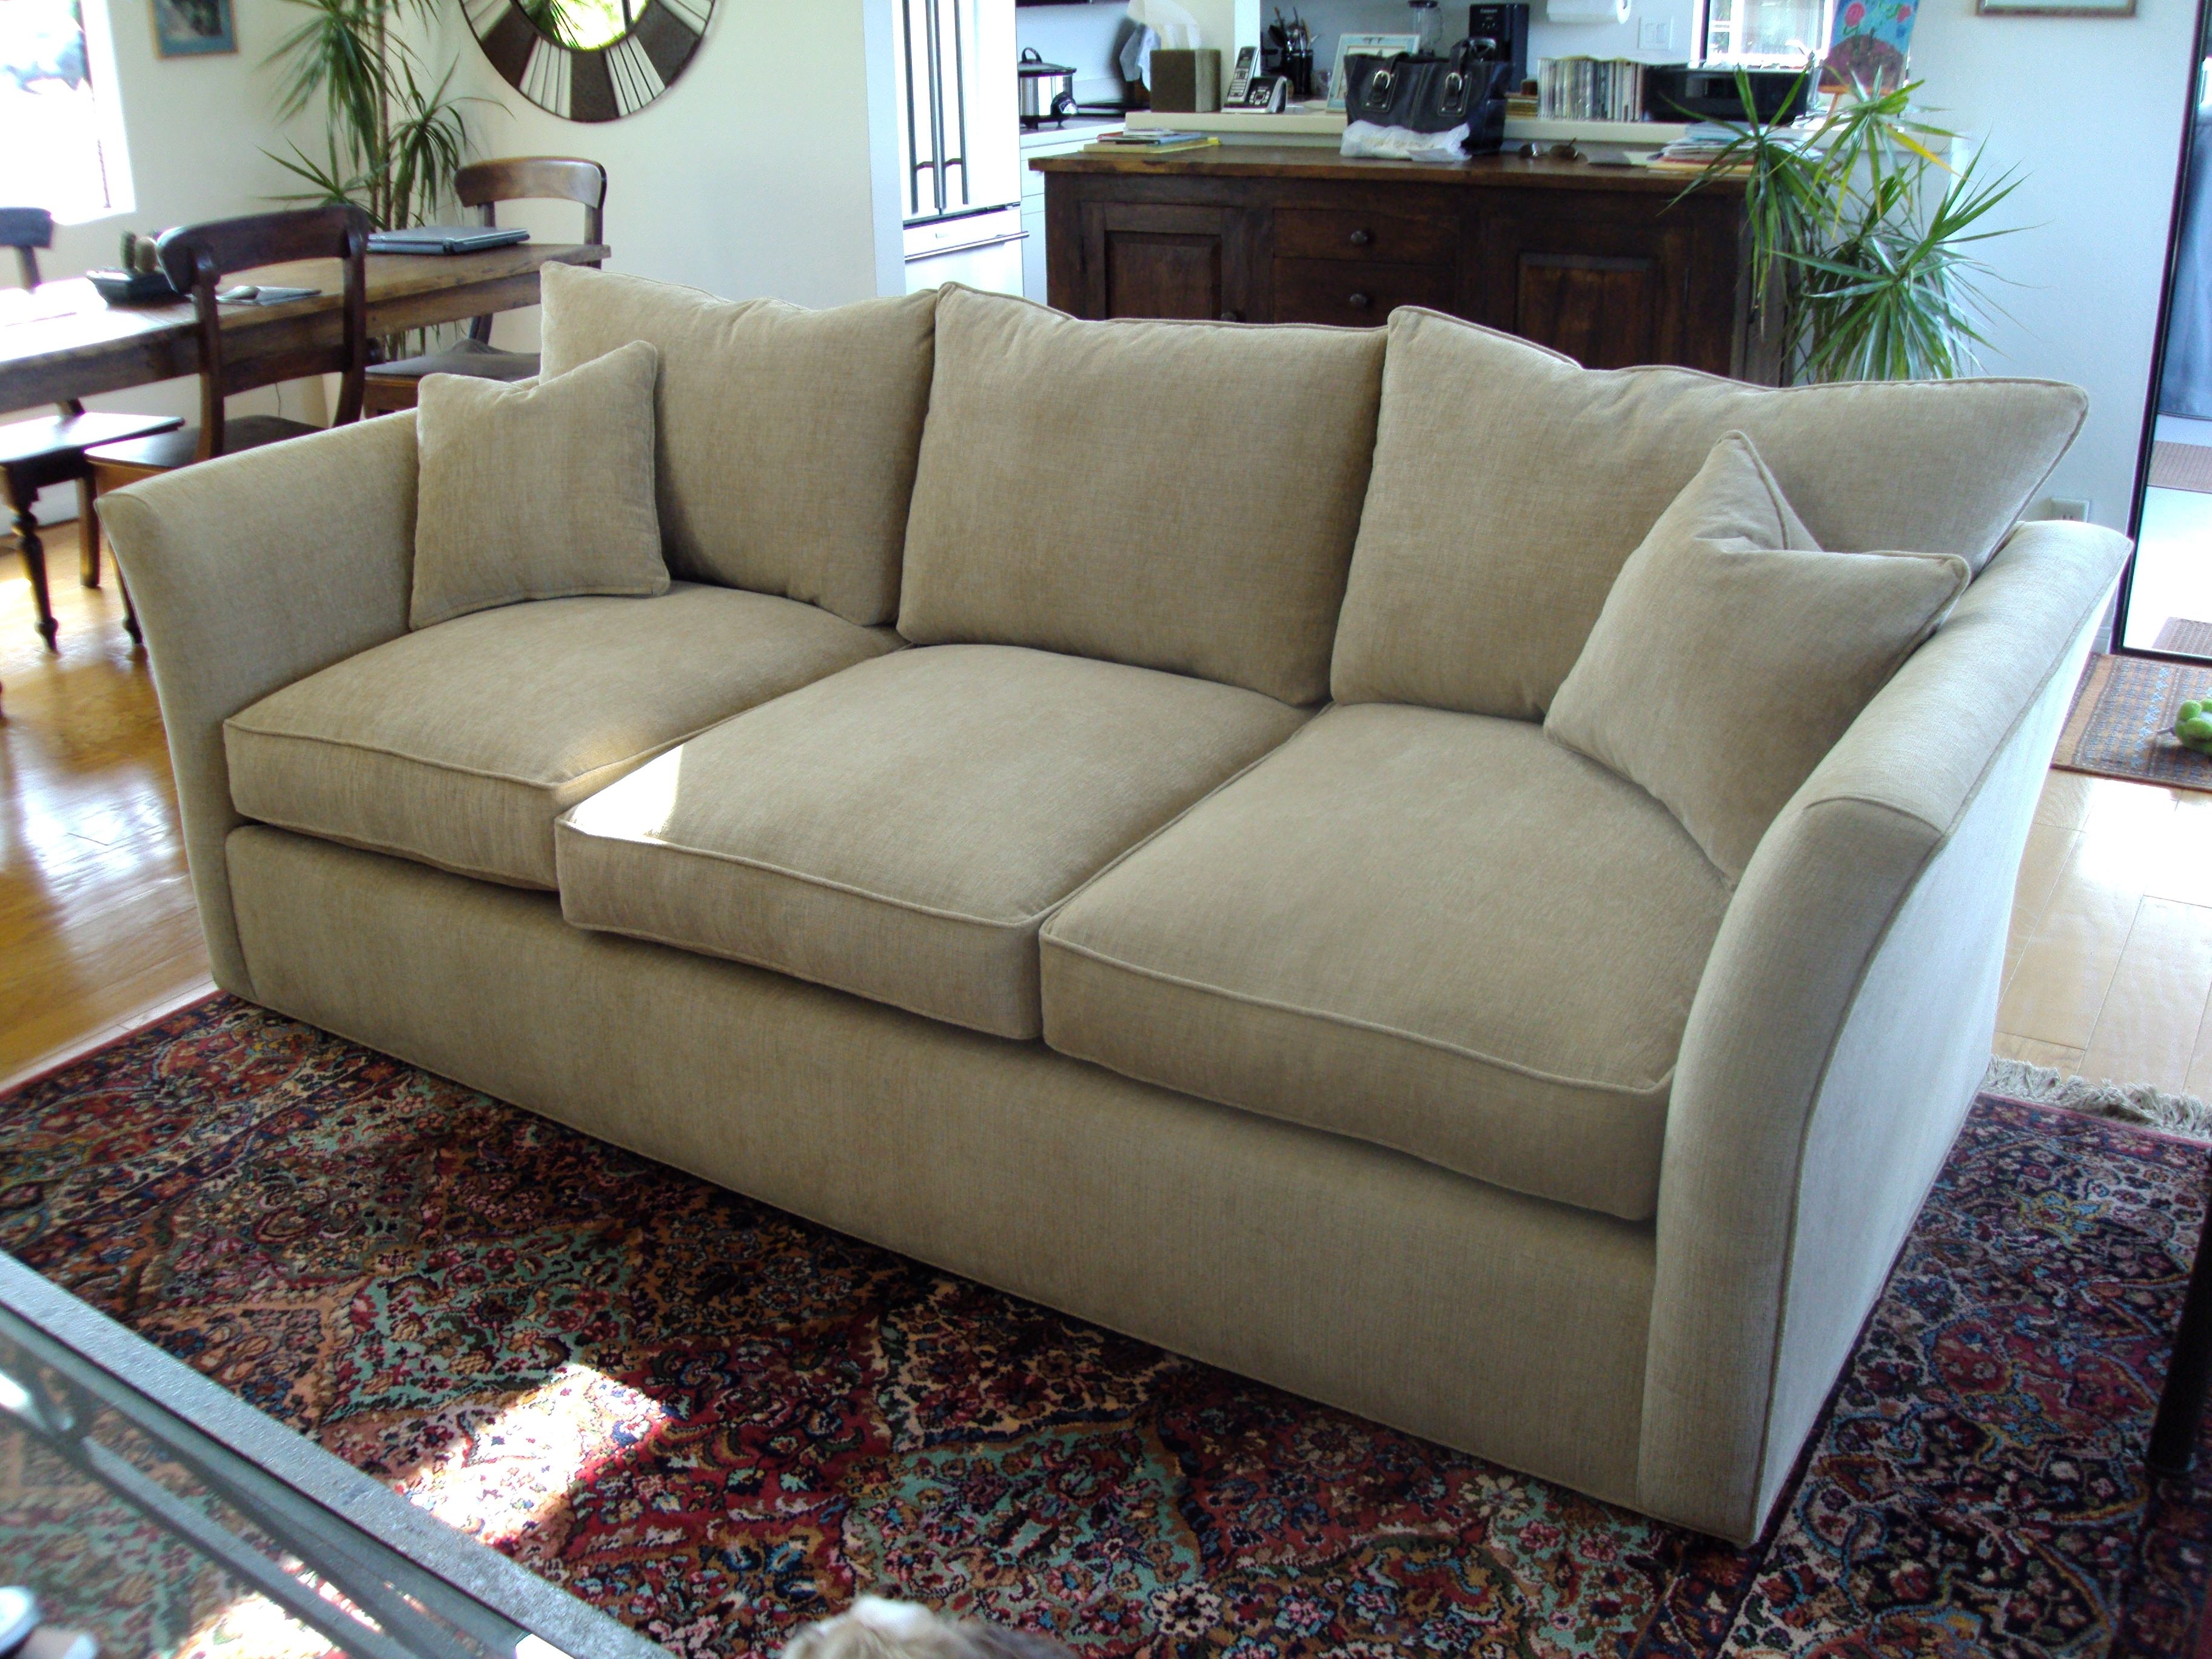 Attractive Reupholstering A Sectional Sofa 67 For Sectional Sofas Within North Carolina Sectional Sofas (View 6 of 10)